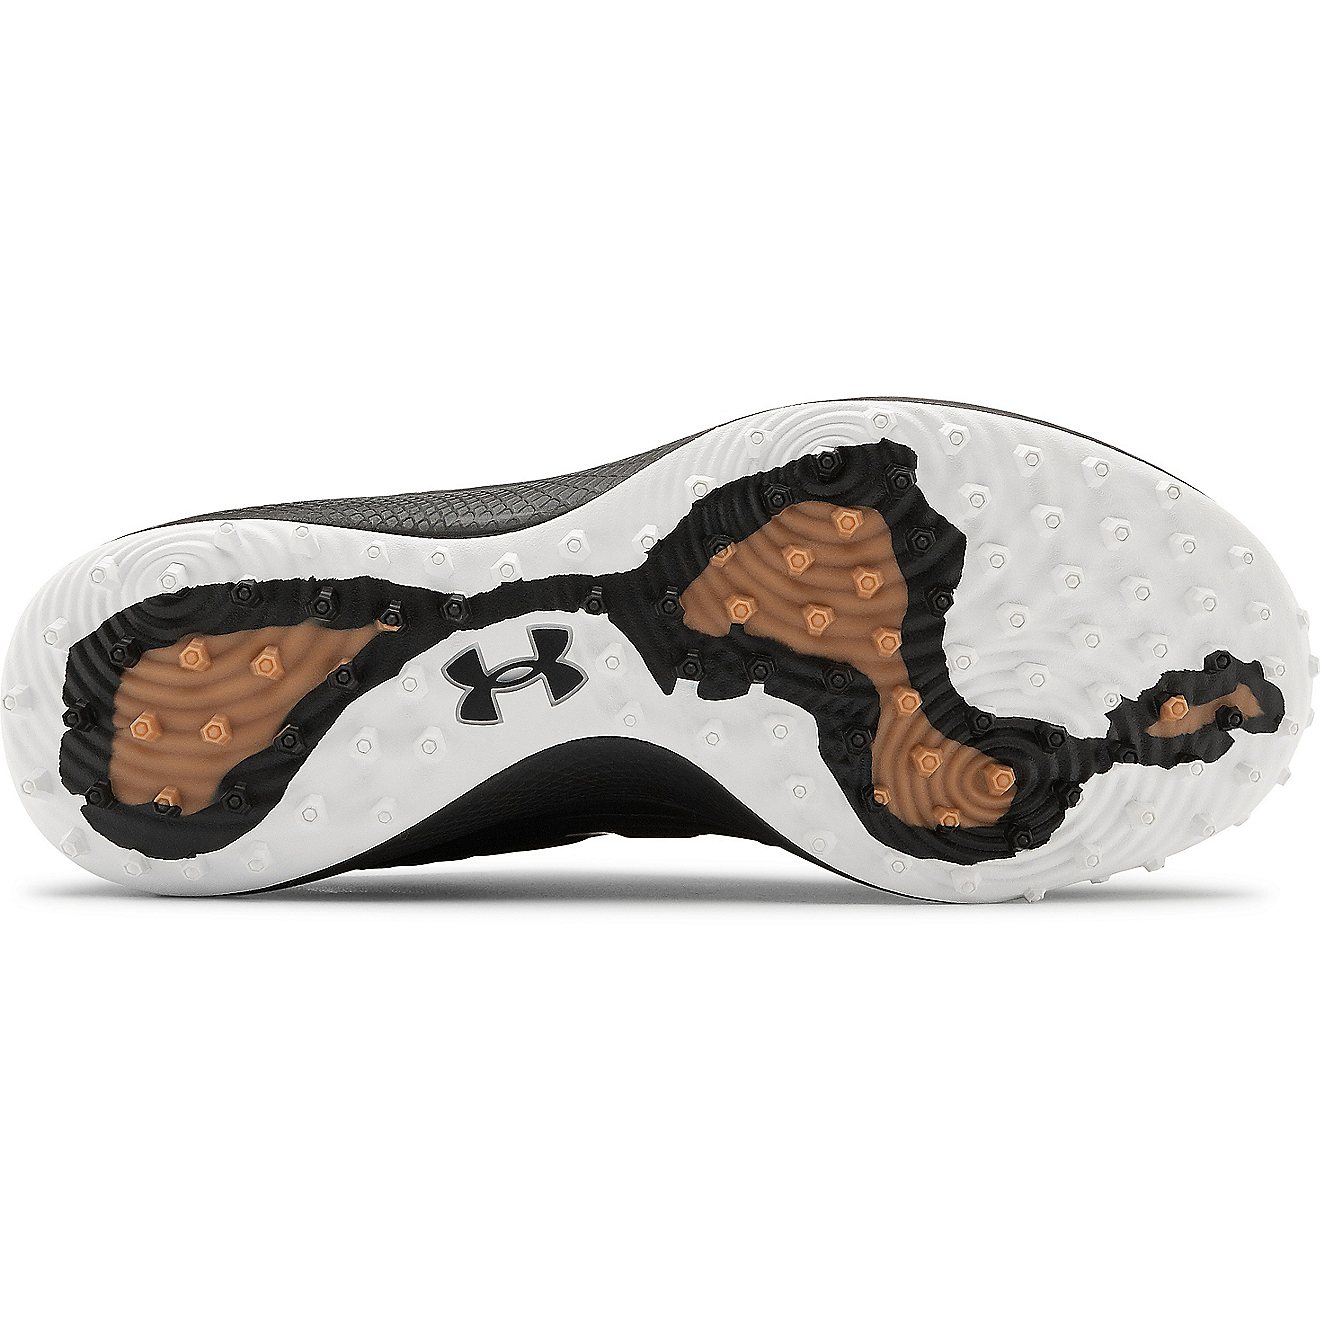 Under Armour Men's Yard Turf Baseball Cleats                                                                                     - view number 5